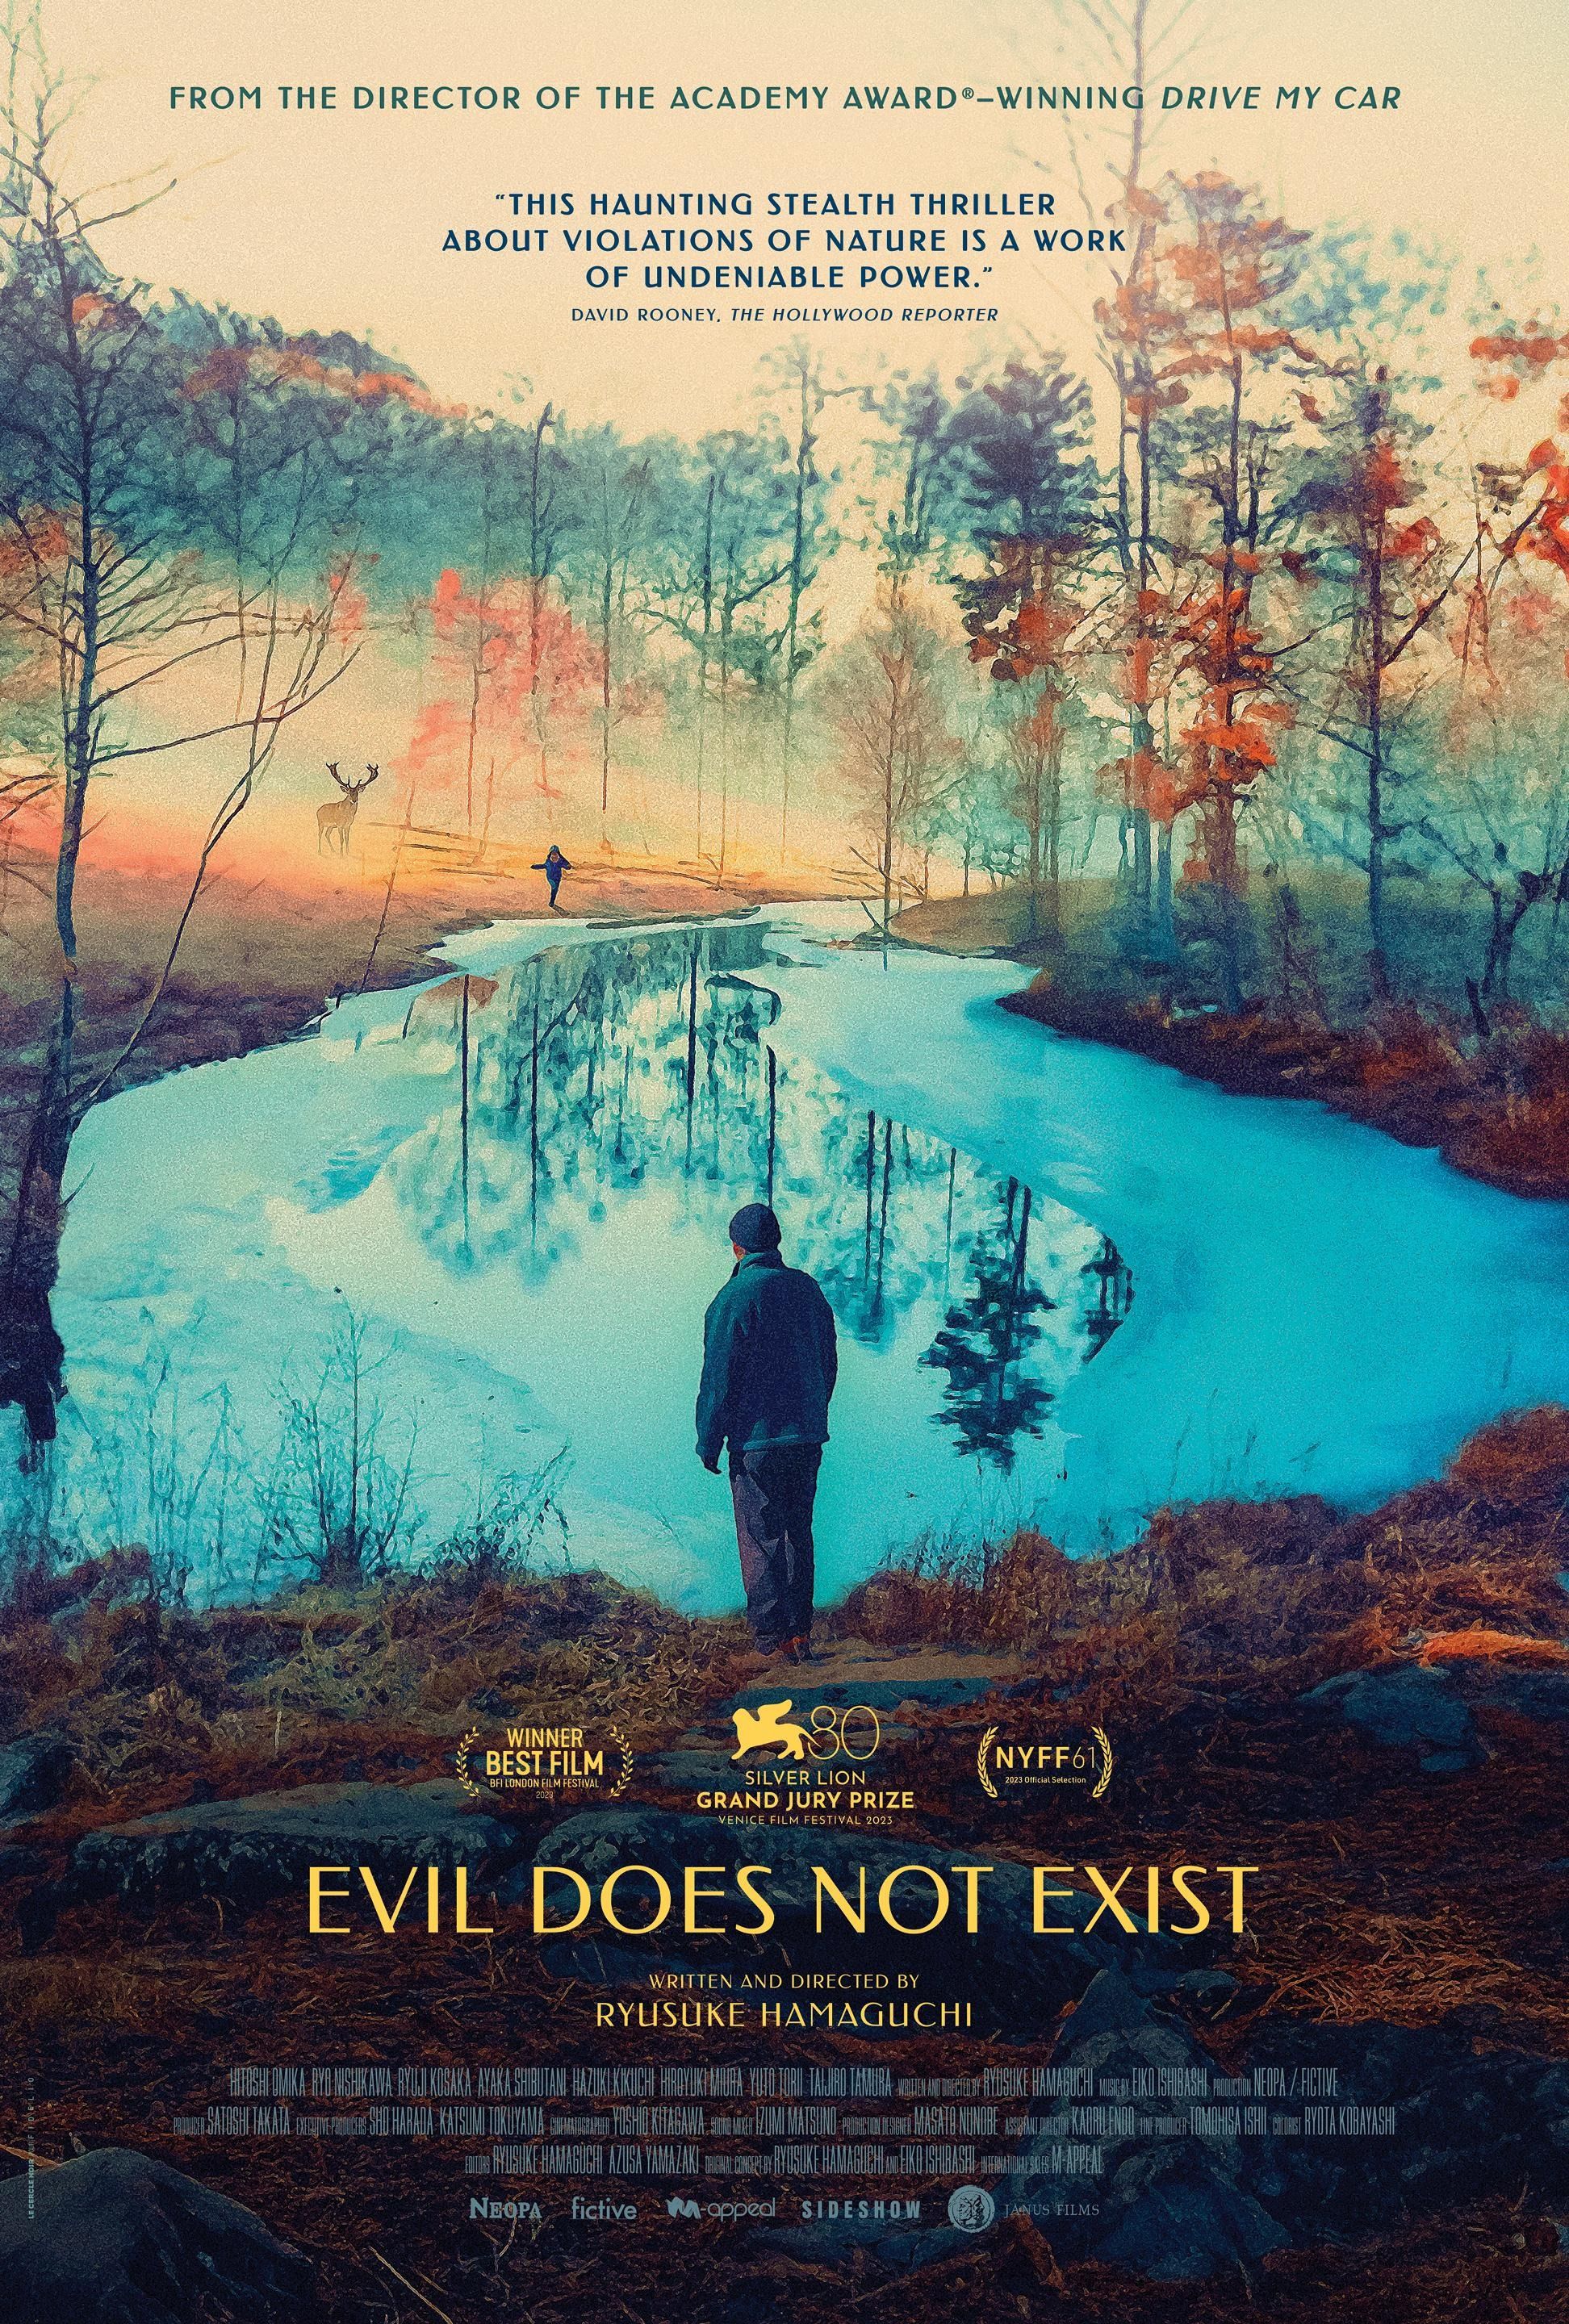 Evil Does Not Exist Film Poster